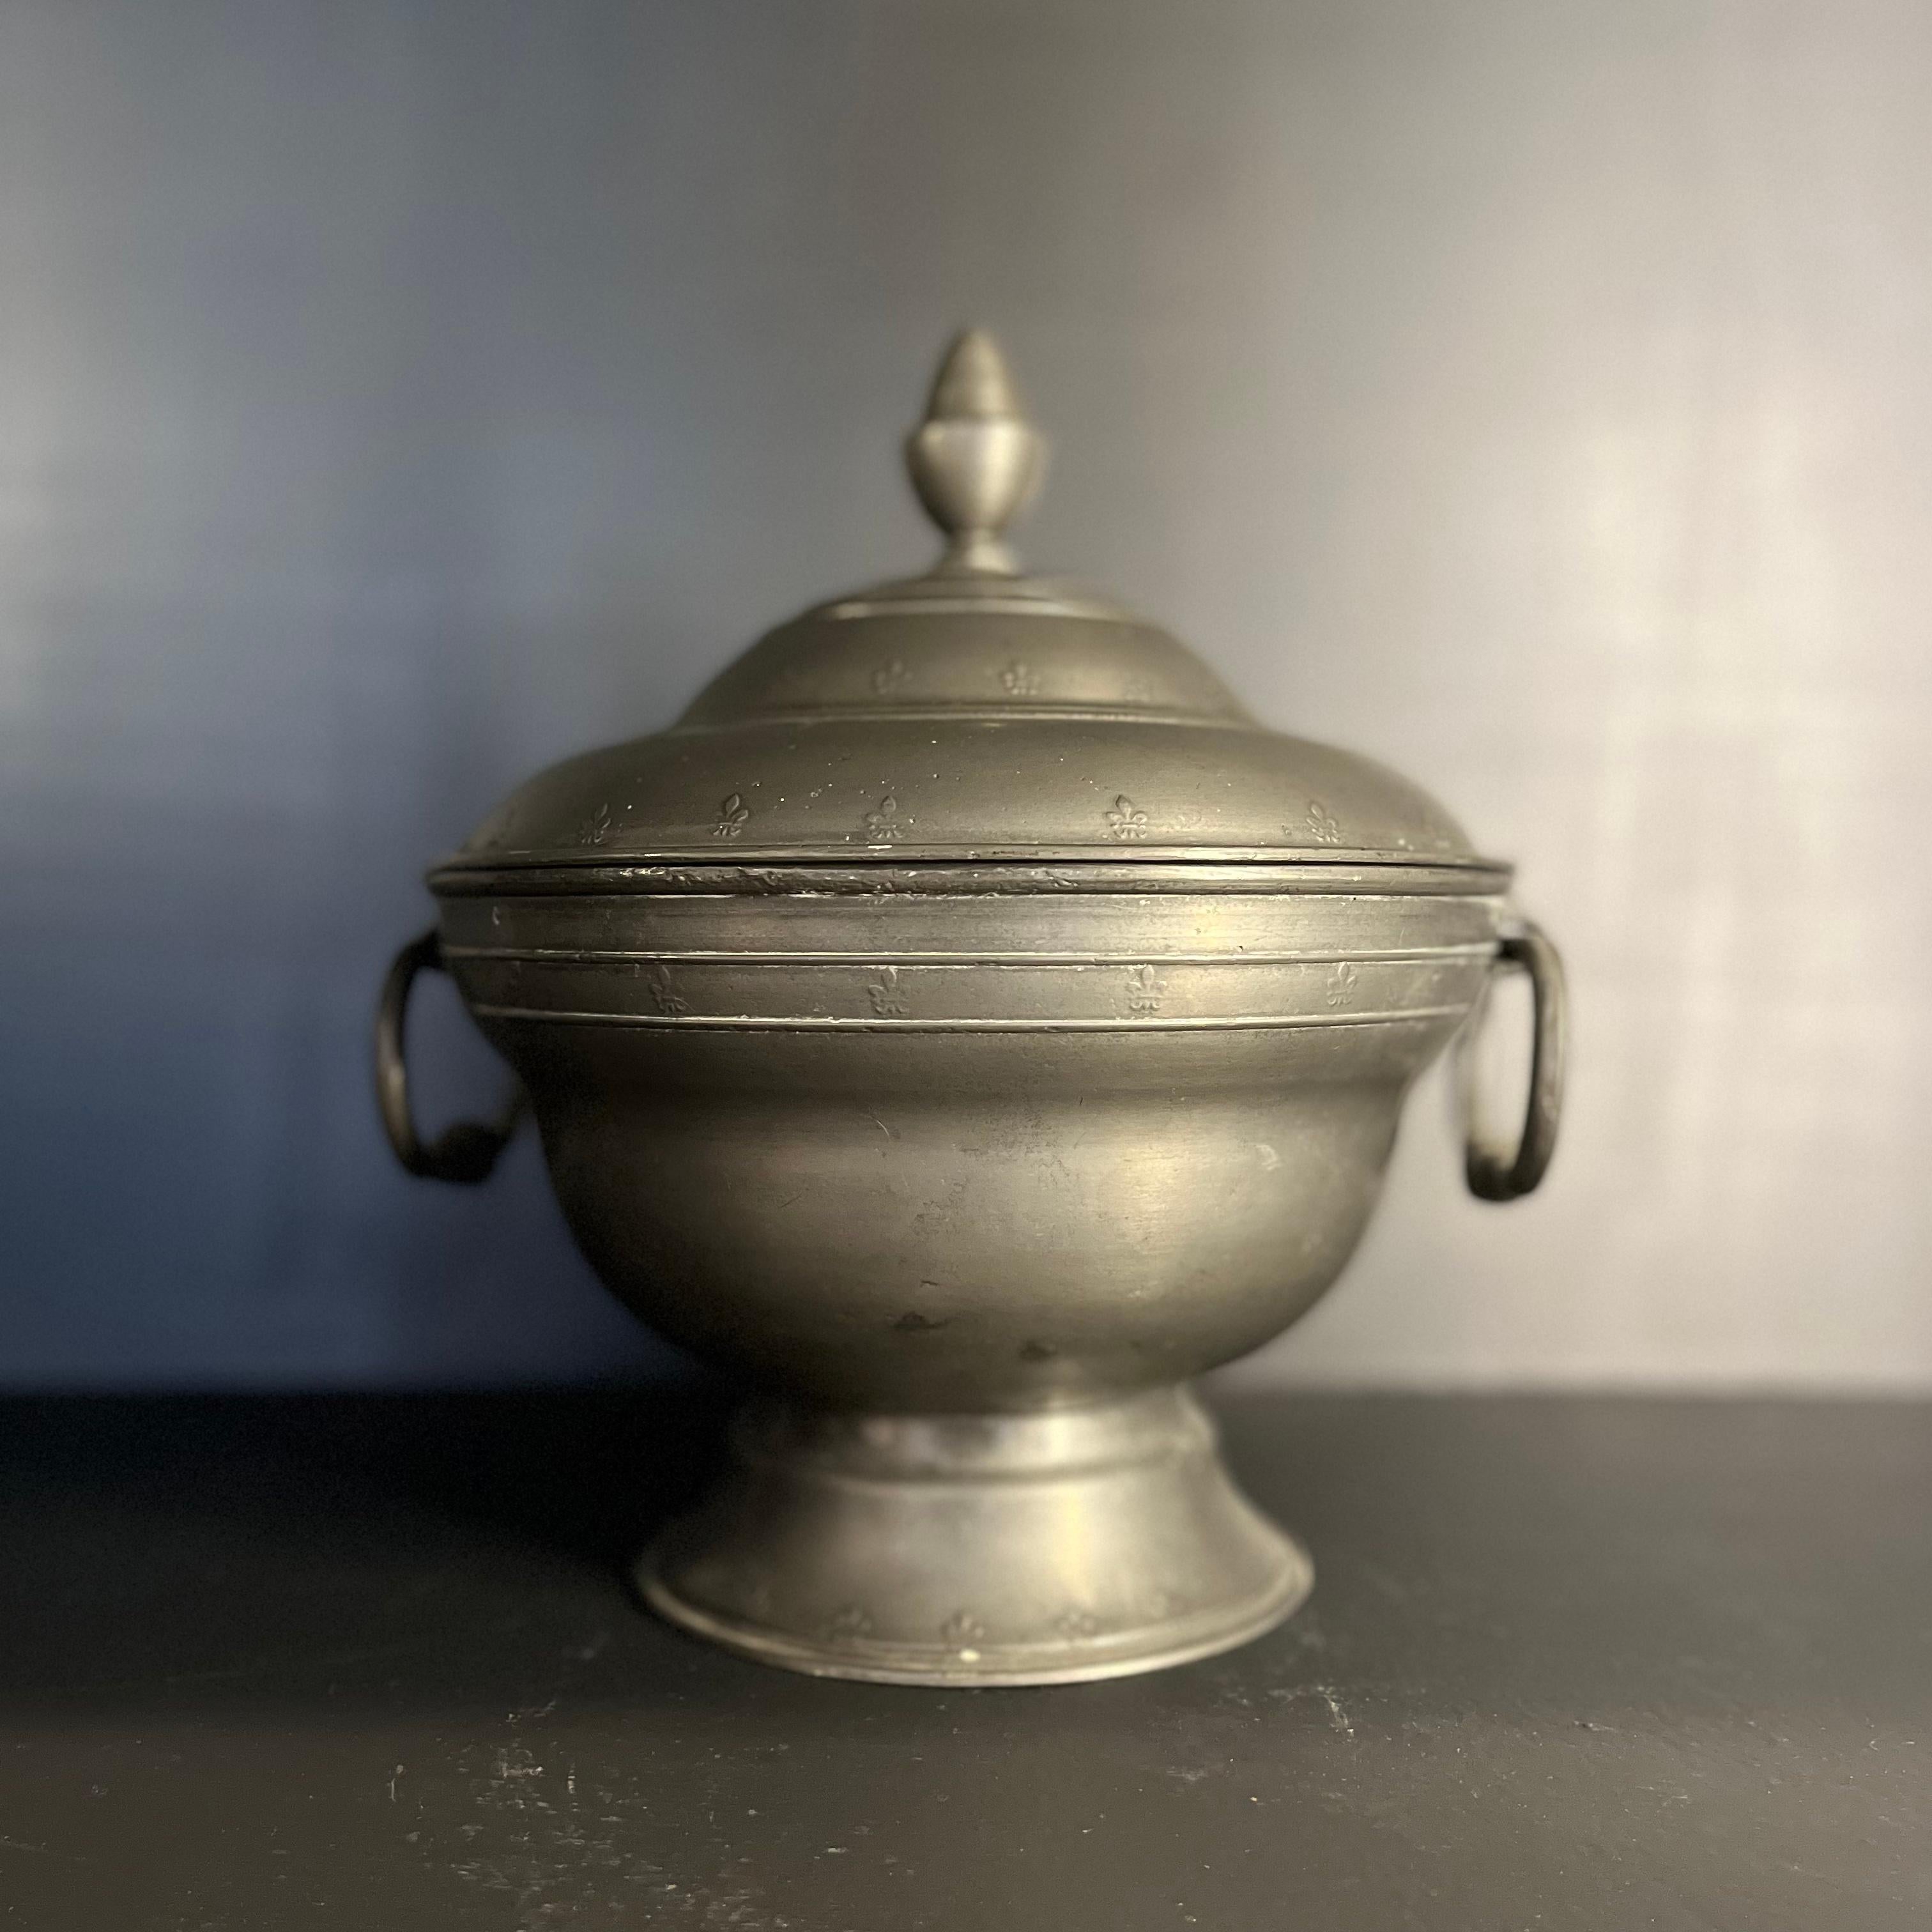 Mid-19th century round pewter soup tureen from France. Featuring an elevated base, two ring-shaped carrying handles, lid with almandine finial topper and delicate decorative raised fleur de lis accenting. Rustic yet refined, the piece could work in